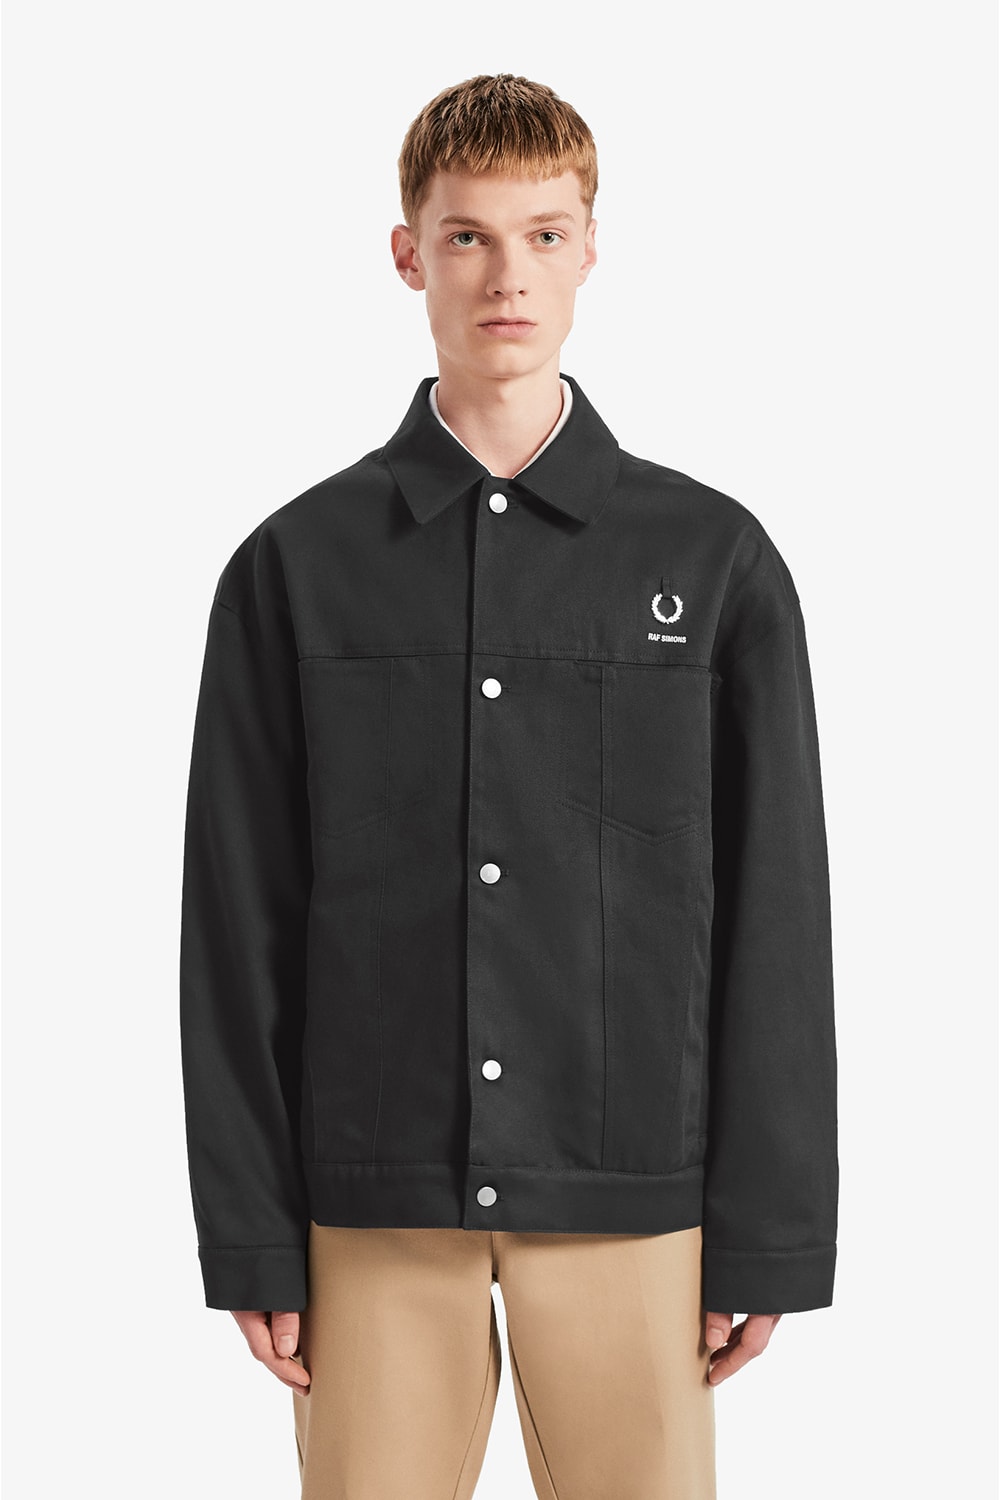 Fred Perry Raf Simons